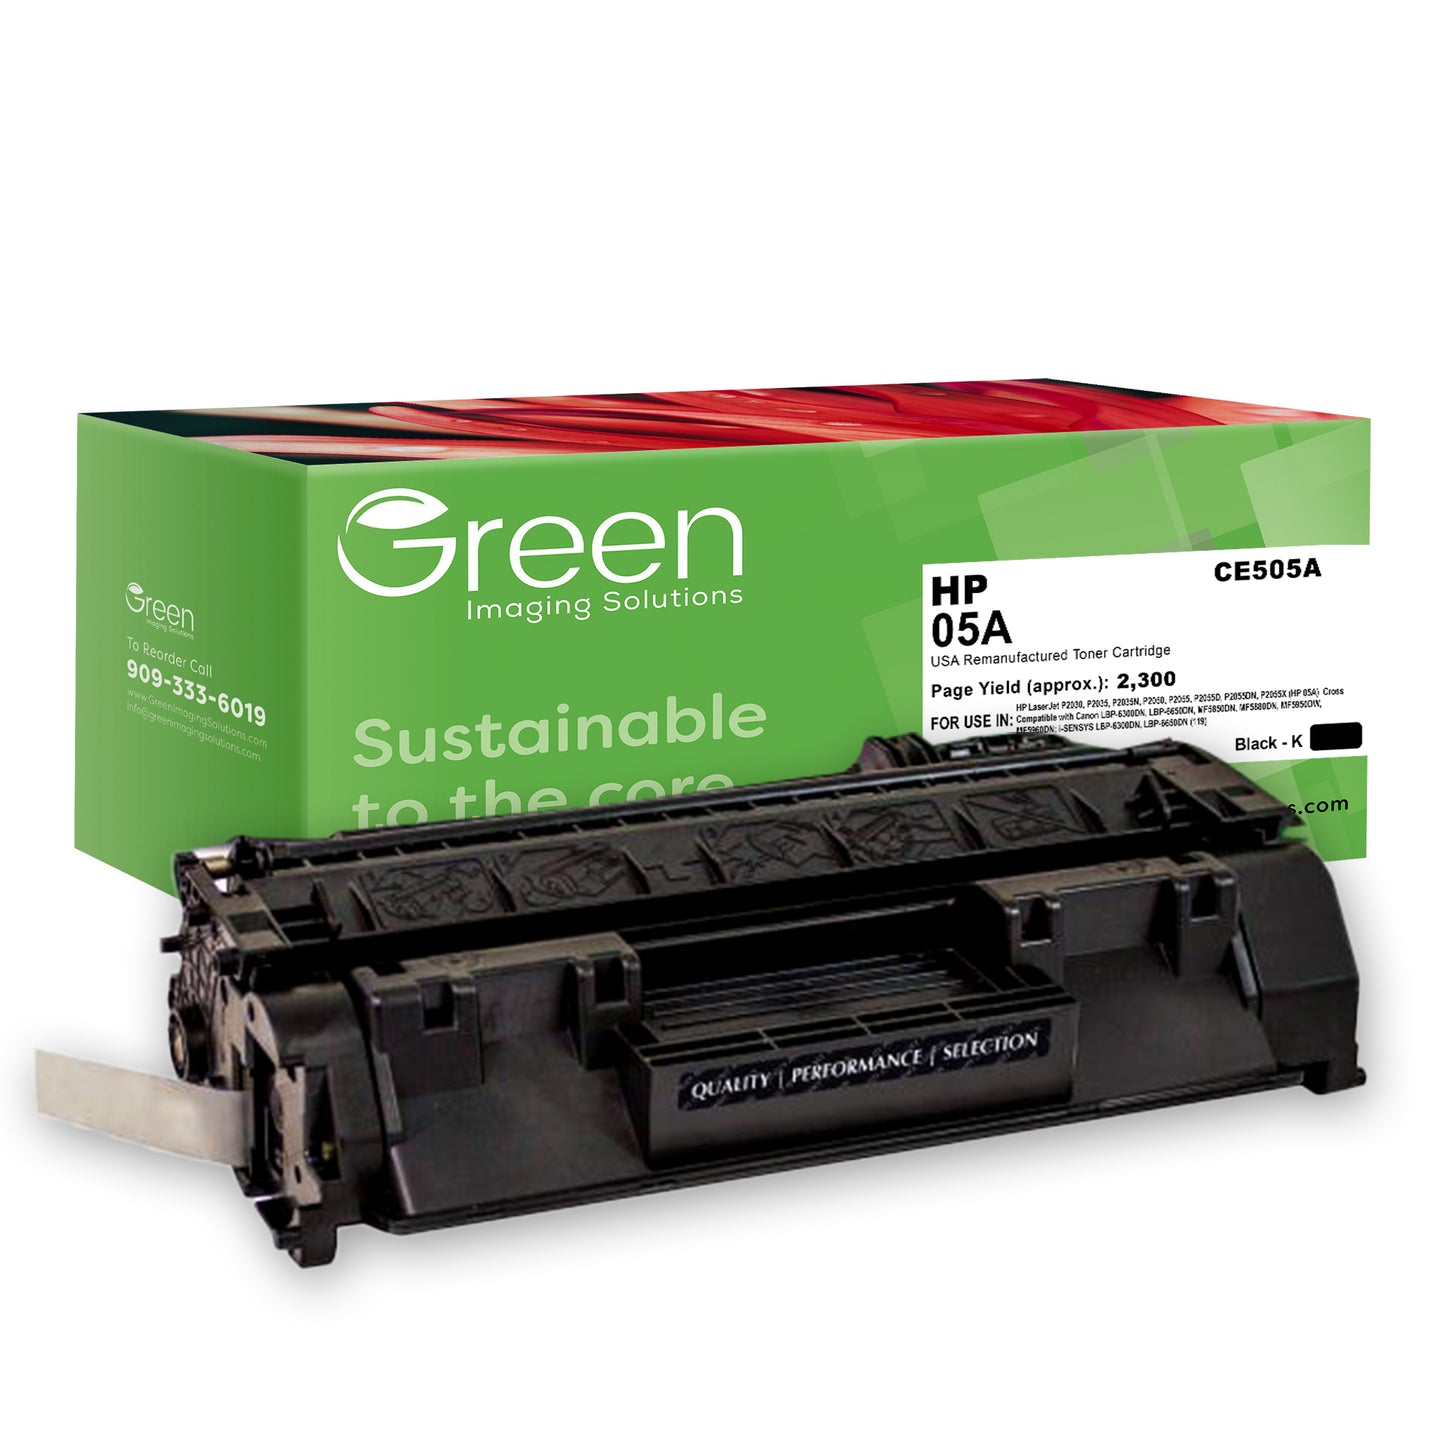 GIS USA Remanufactured Toner Cartridge for HP CE505A (HP 05A)